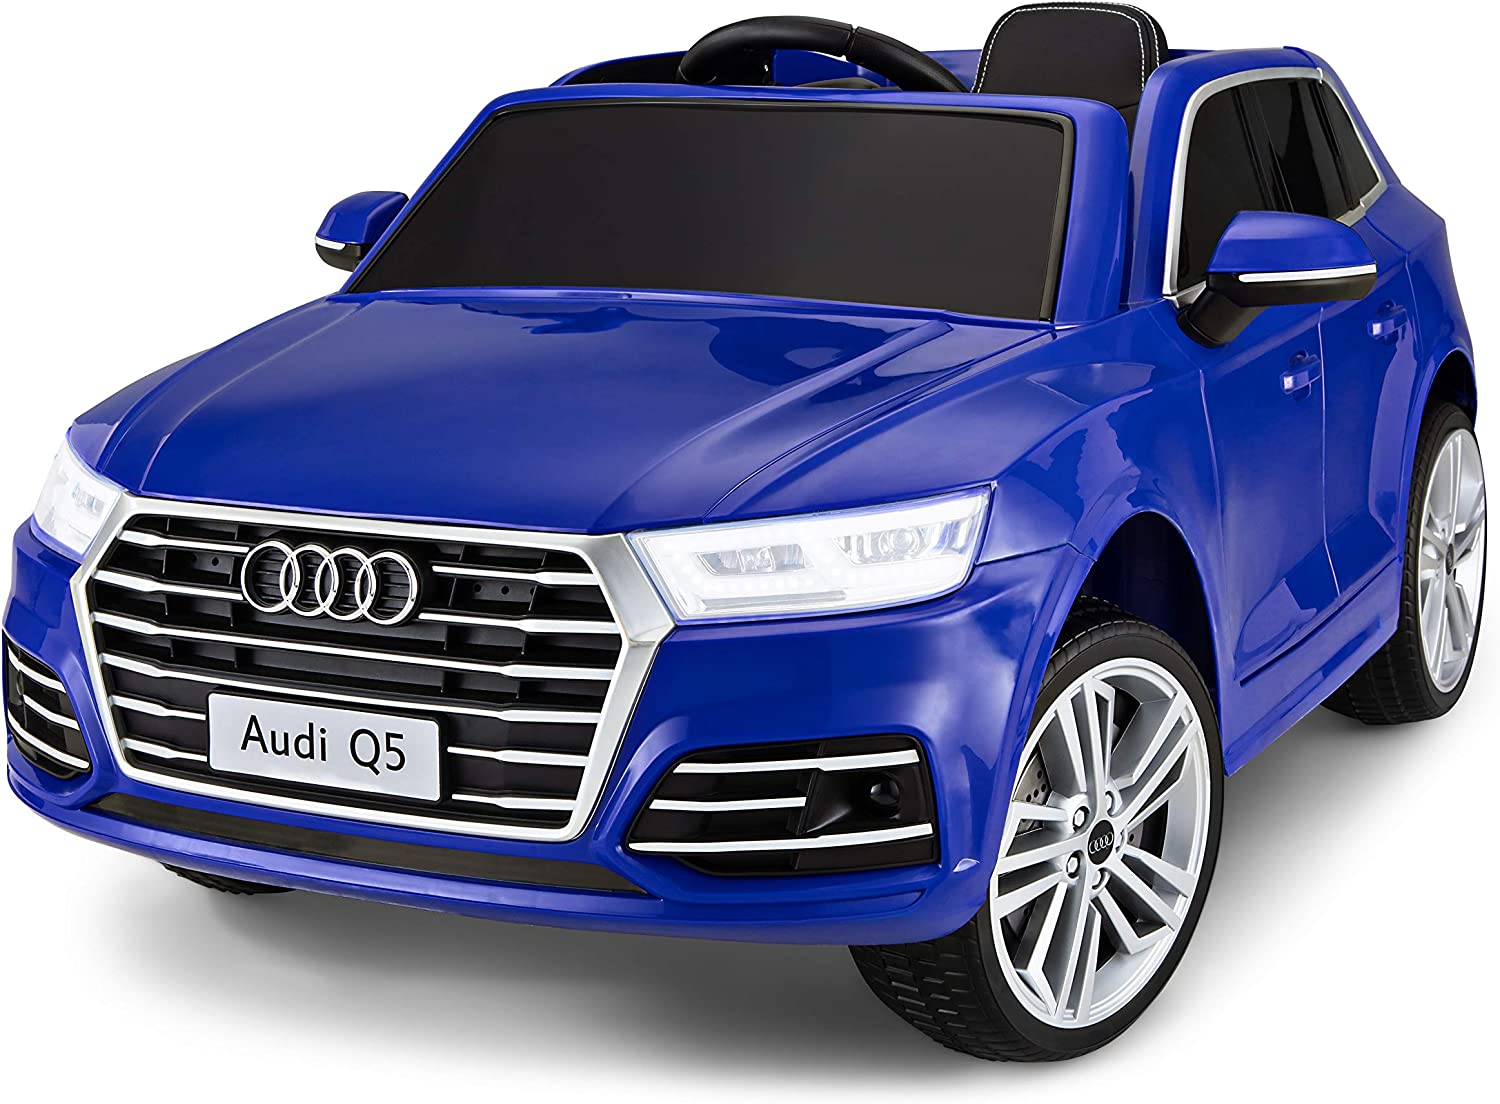 Kid Trax Electric Kids Luxury Audi Q5 Car 6-Volt Battery Ride-On Toy w/ Adult Remote Control $150.69 + Free Shipping @ Amazon